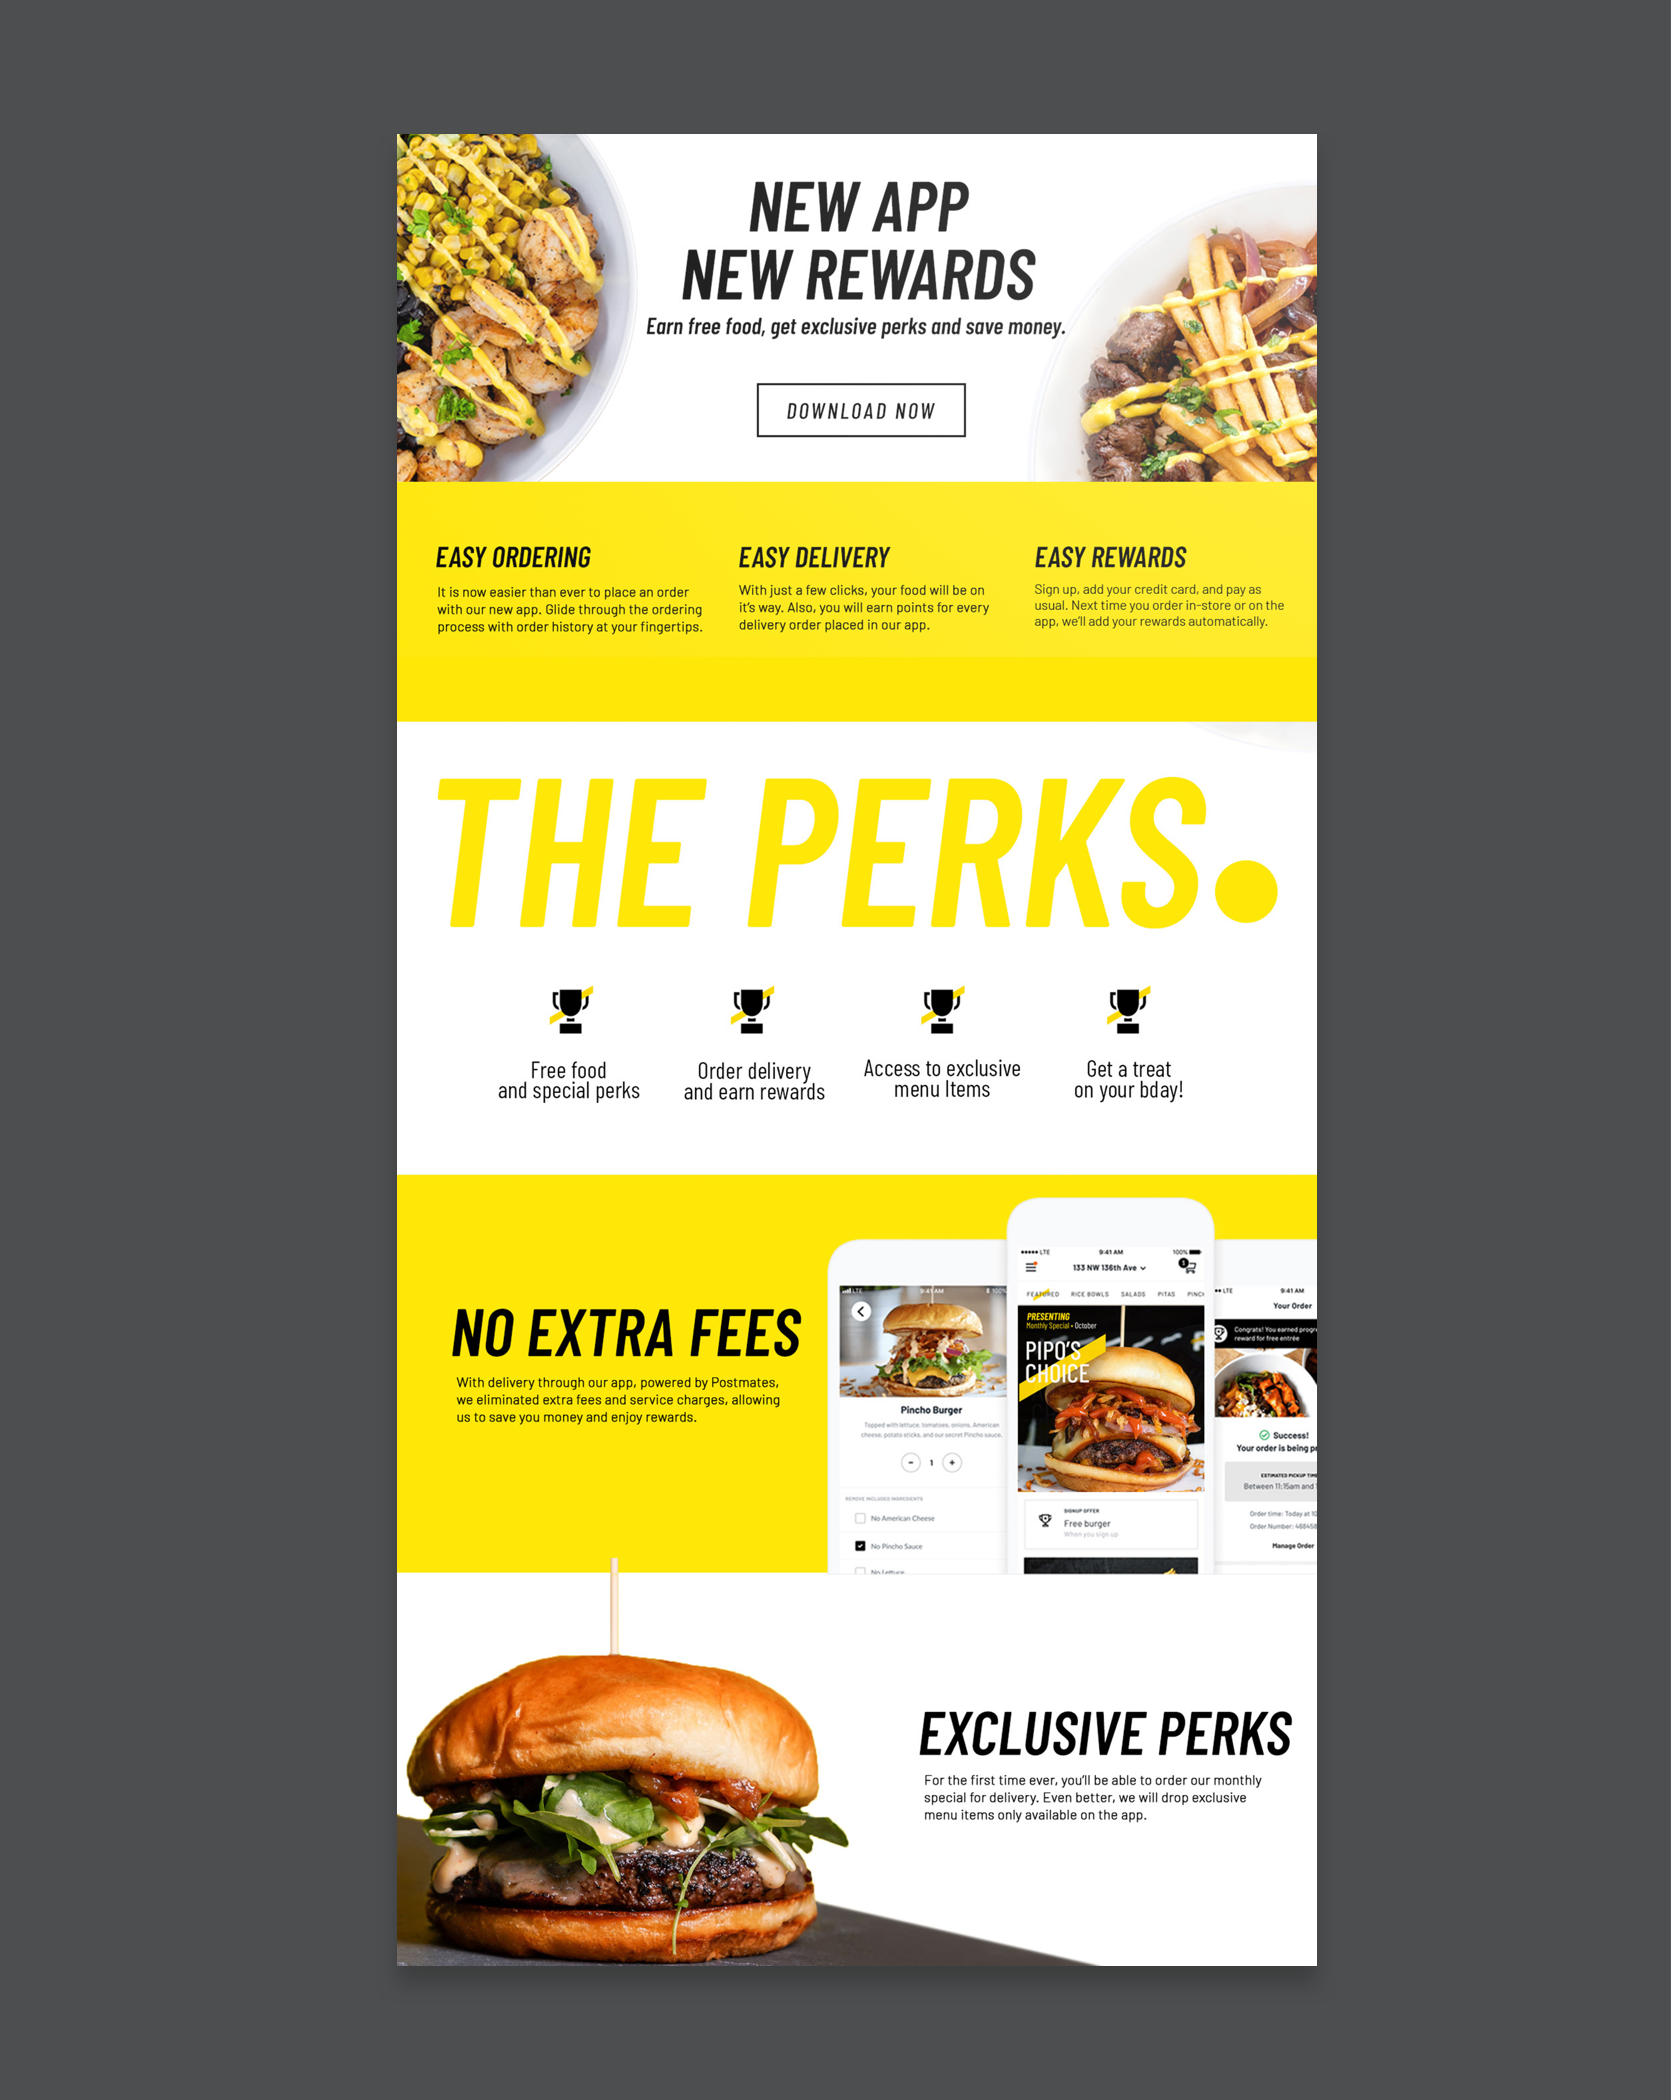 App rewards design with food image in hero and THE PERKS font across the middle.